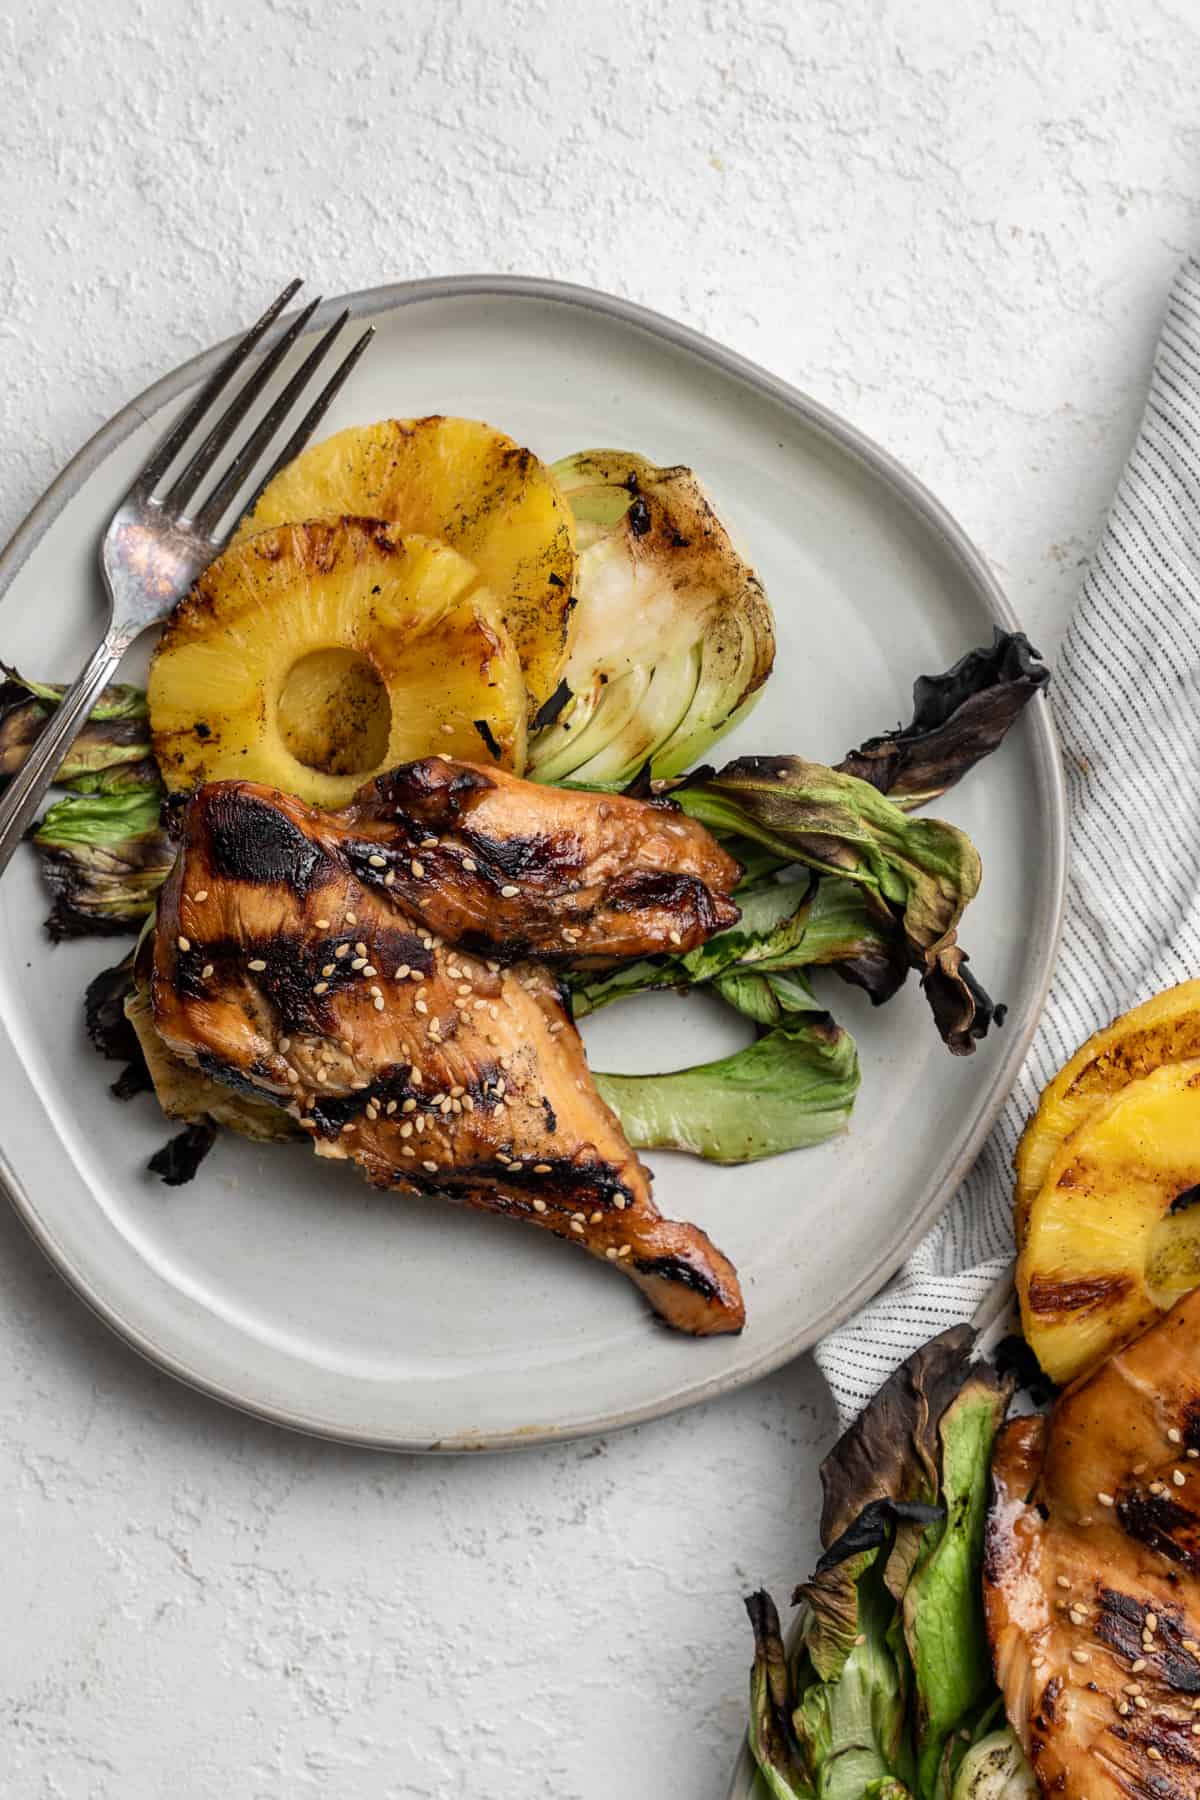 Plate of grilled teriyaki chicken, pineapple, and baby bok choy.